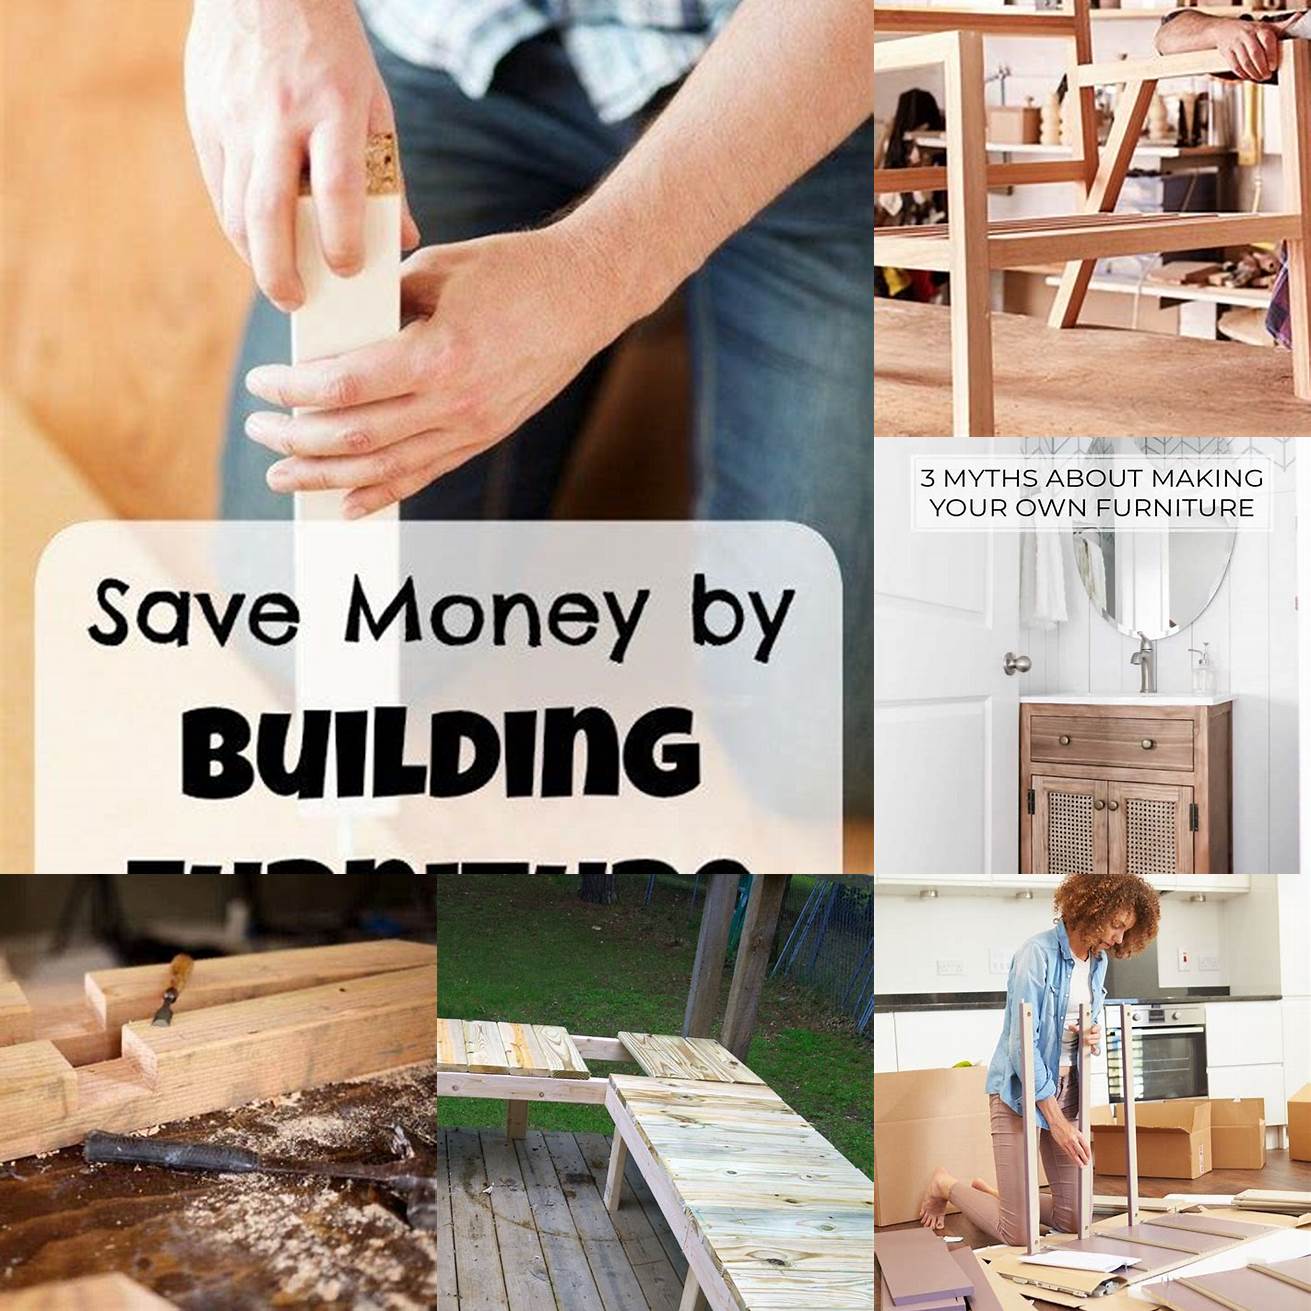 Cost Savings Building your own furniture can be less expensive than buying pre-made pieces from a store While the cost of materials and tools can add up you can often save money by doing the work yourself